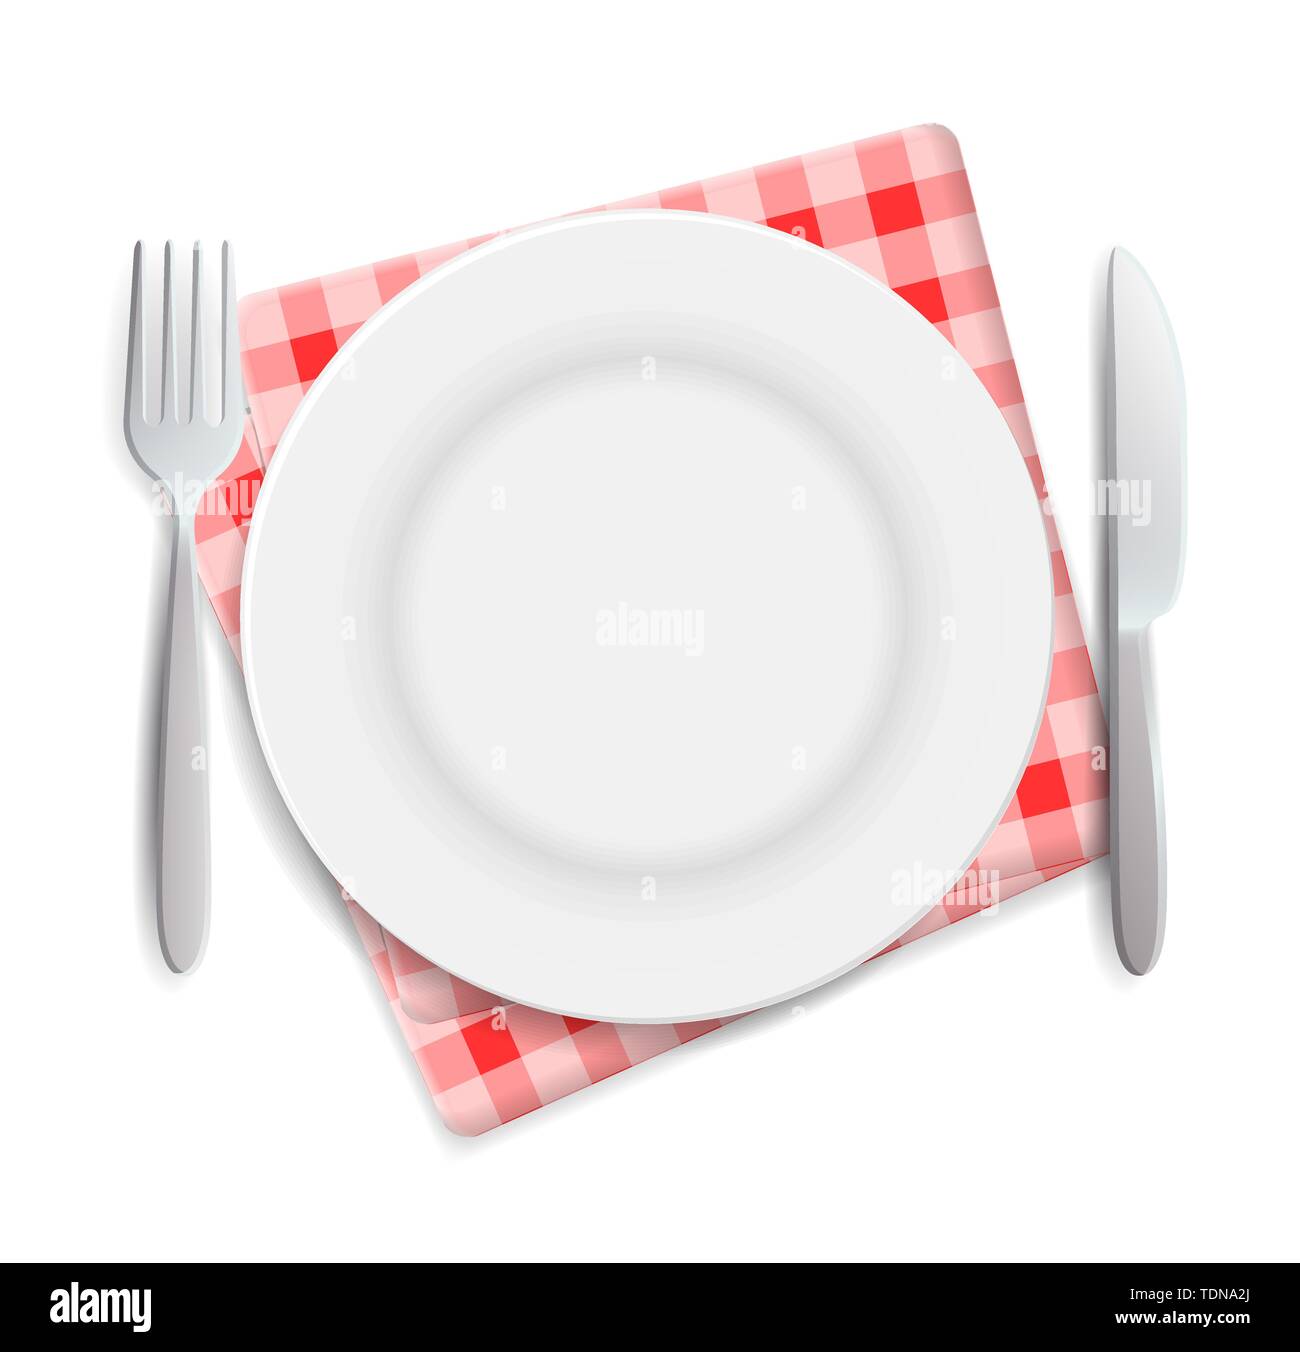 Realistic empty plate, fork and knife served on checkered red napkin vector illustration. Can be used for advertising Stock Vector